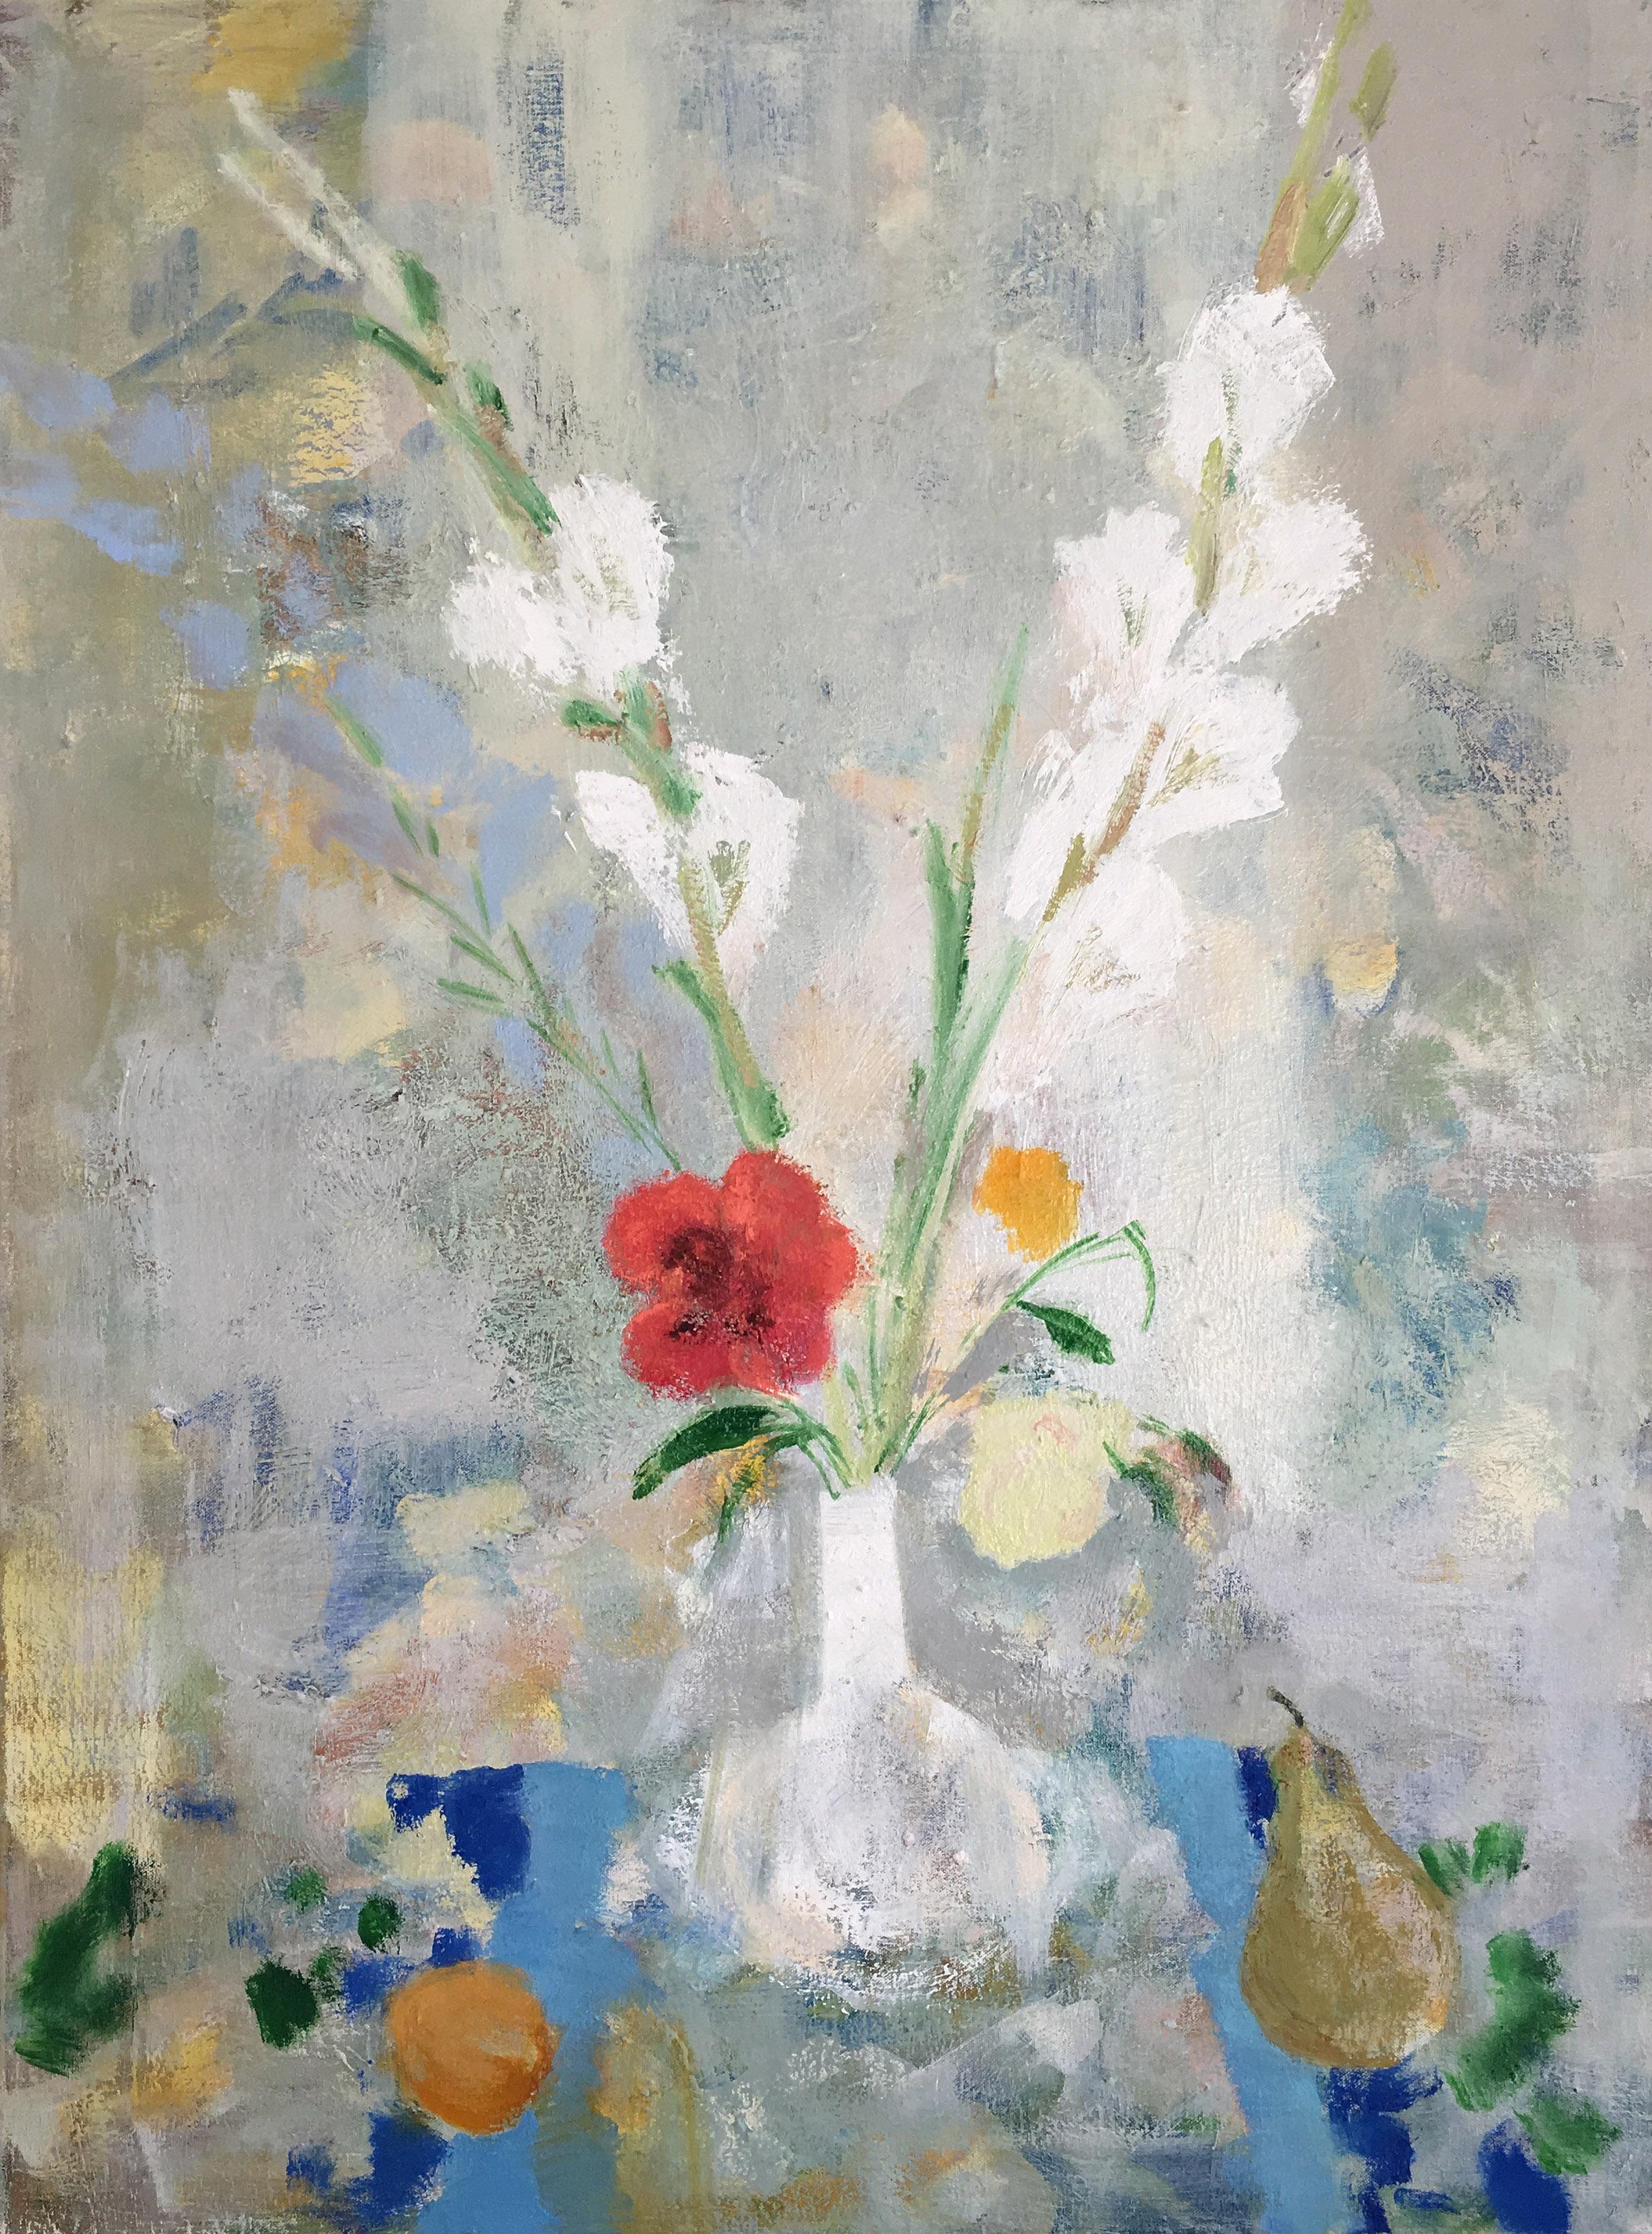 Melanie Parke Still-Life Painting - Gladiola Milk, Botanical Still Life with Red, Blue and White Flowers with Fruit